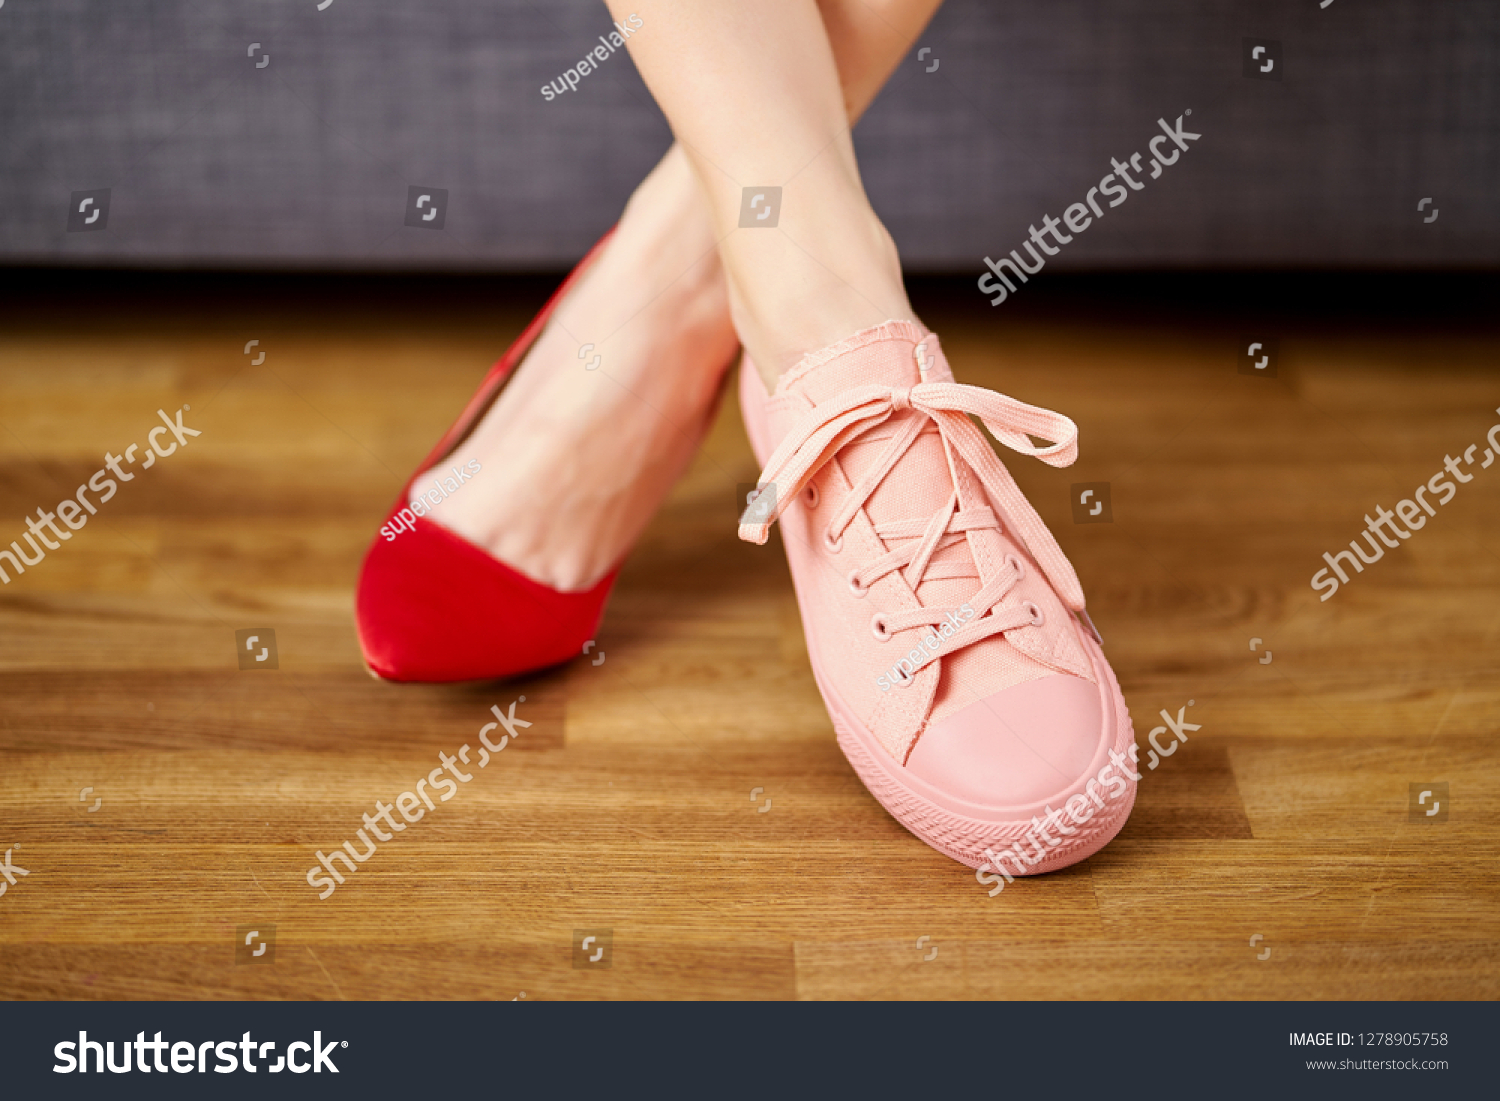 Slim woman's legs in two different shoes with red high heels and coral sneakers on gray couch background. #1278905758